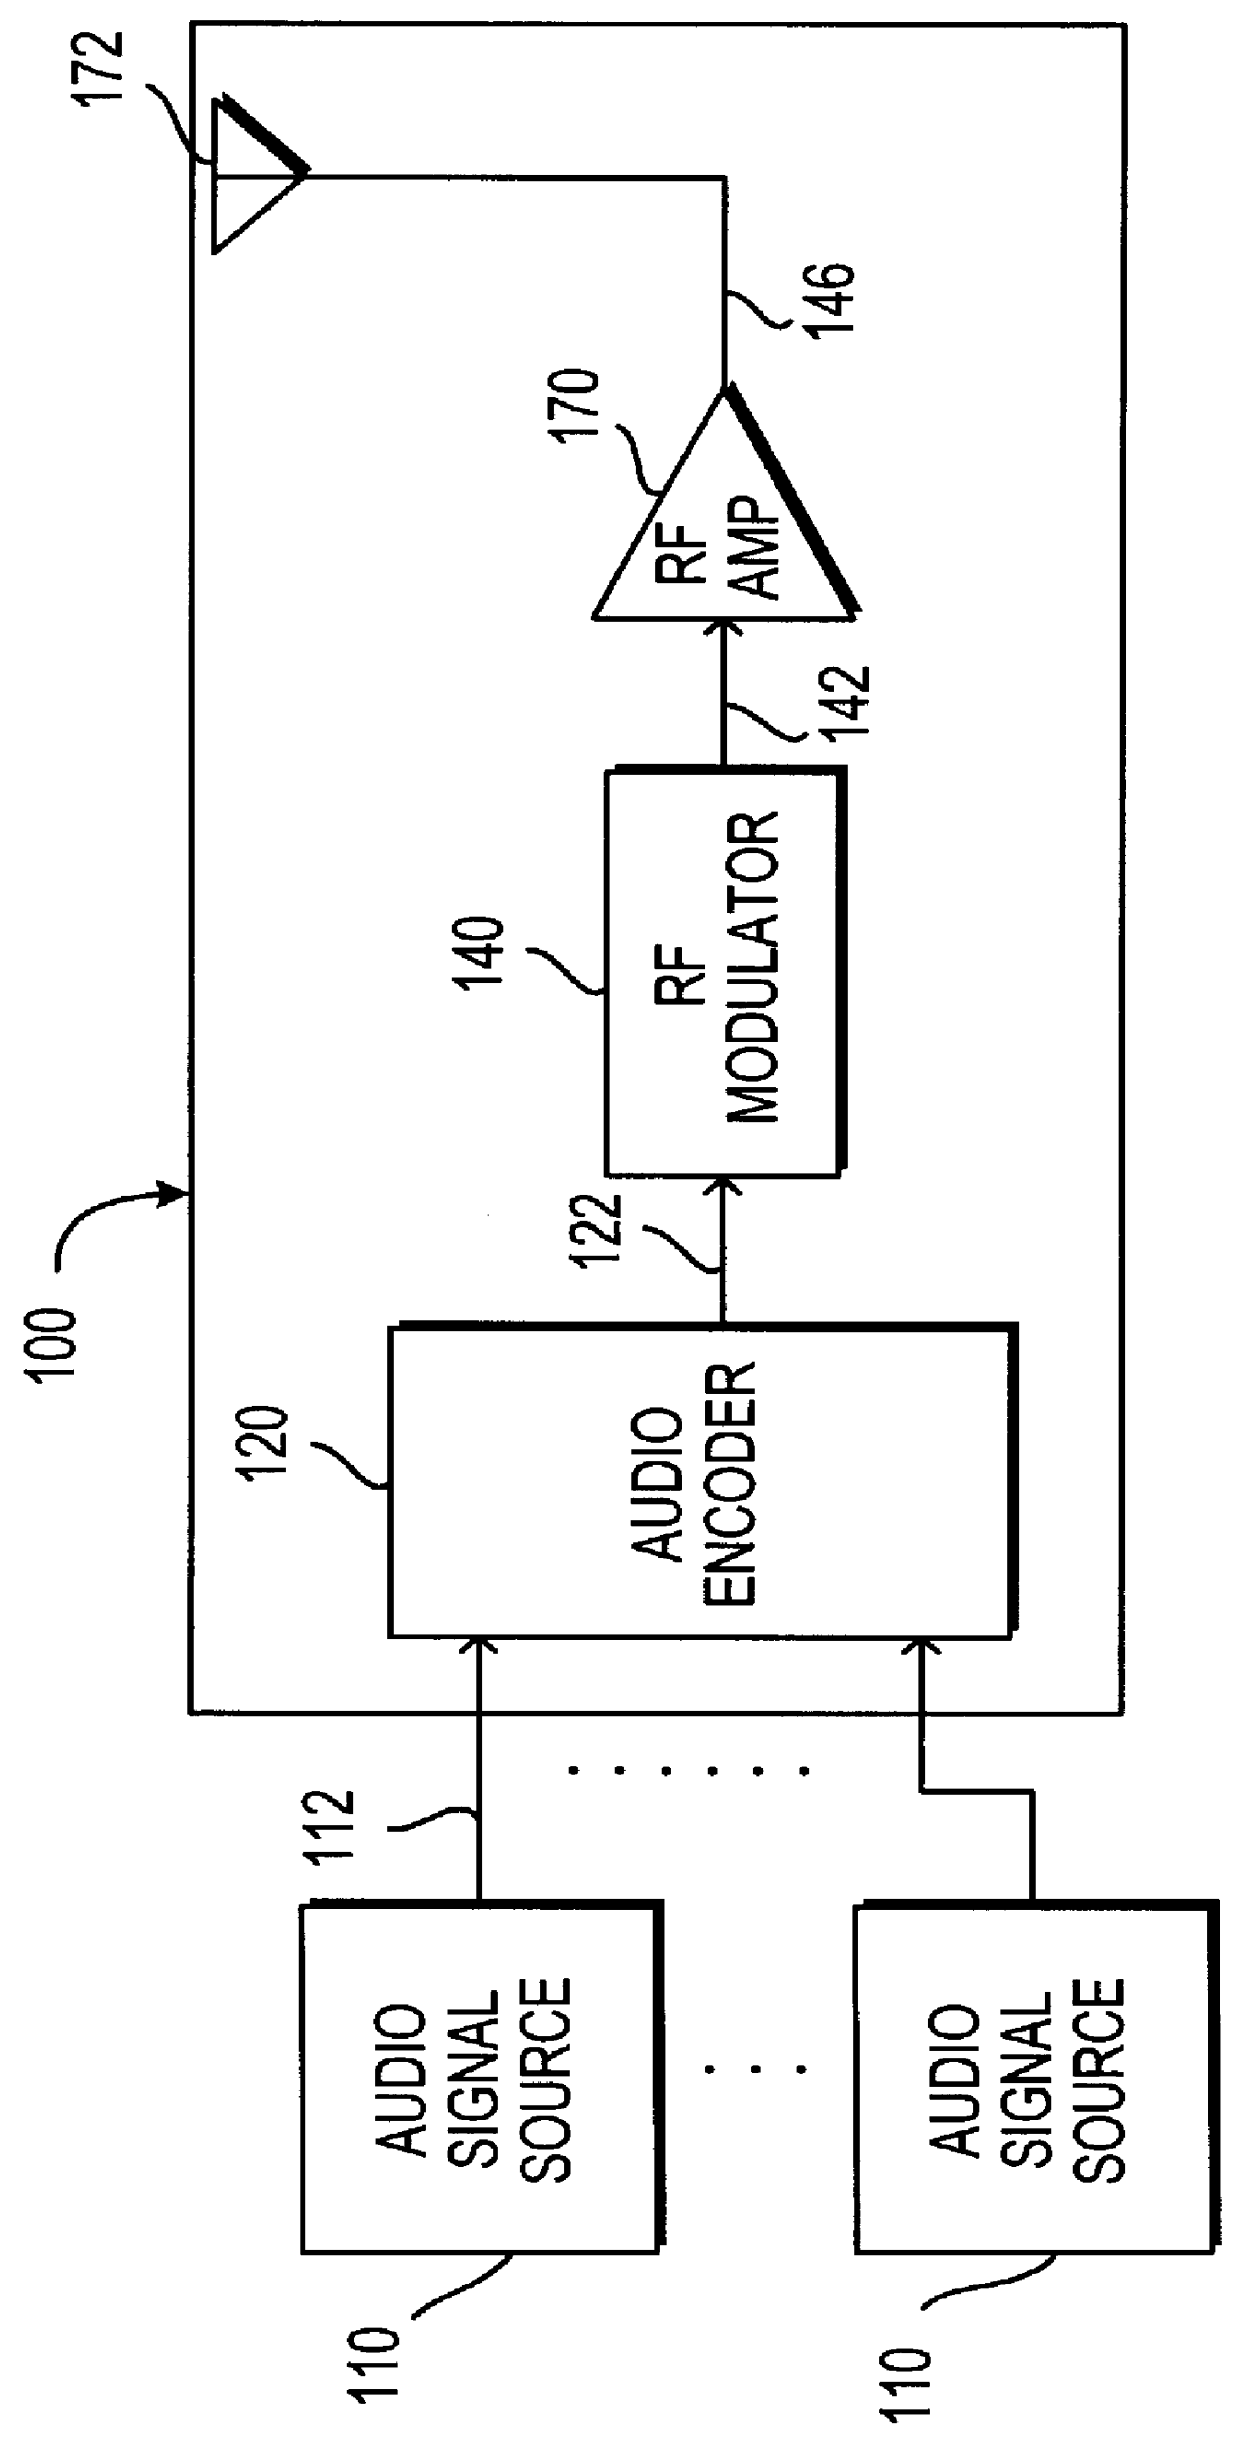 Wireless speaker system for transmitting analog and digital information over a single high-frequency channel